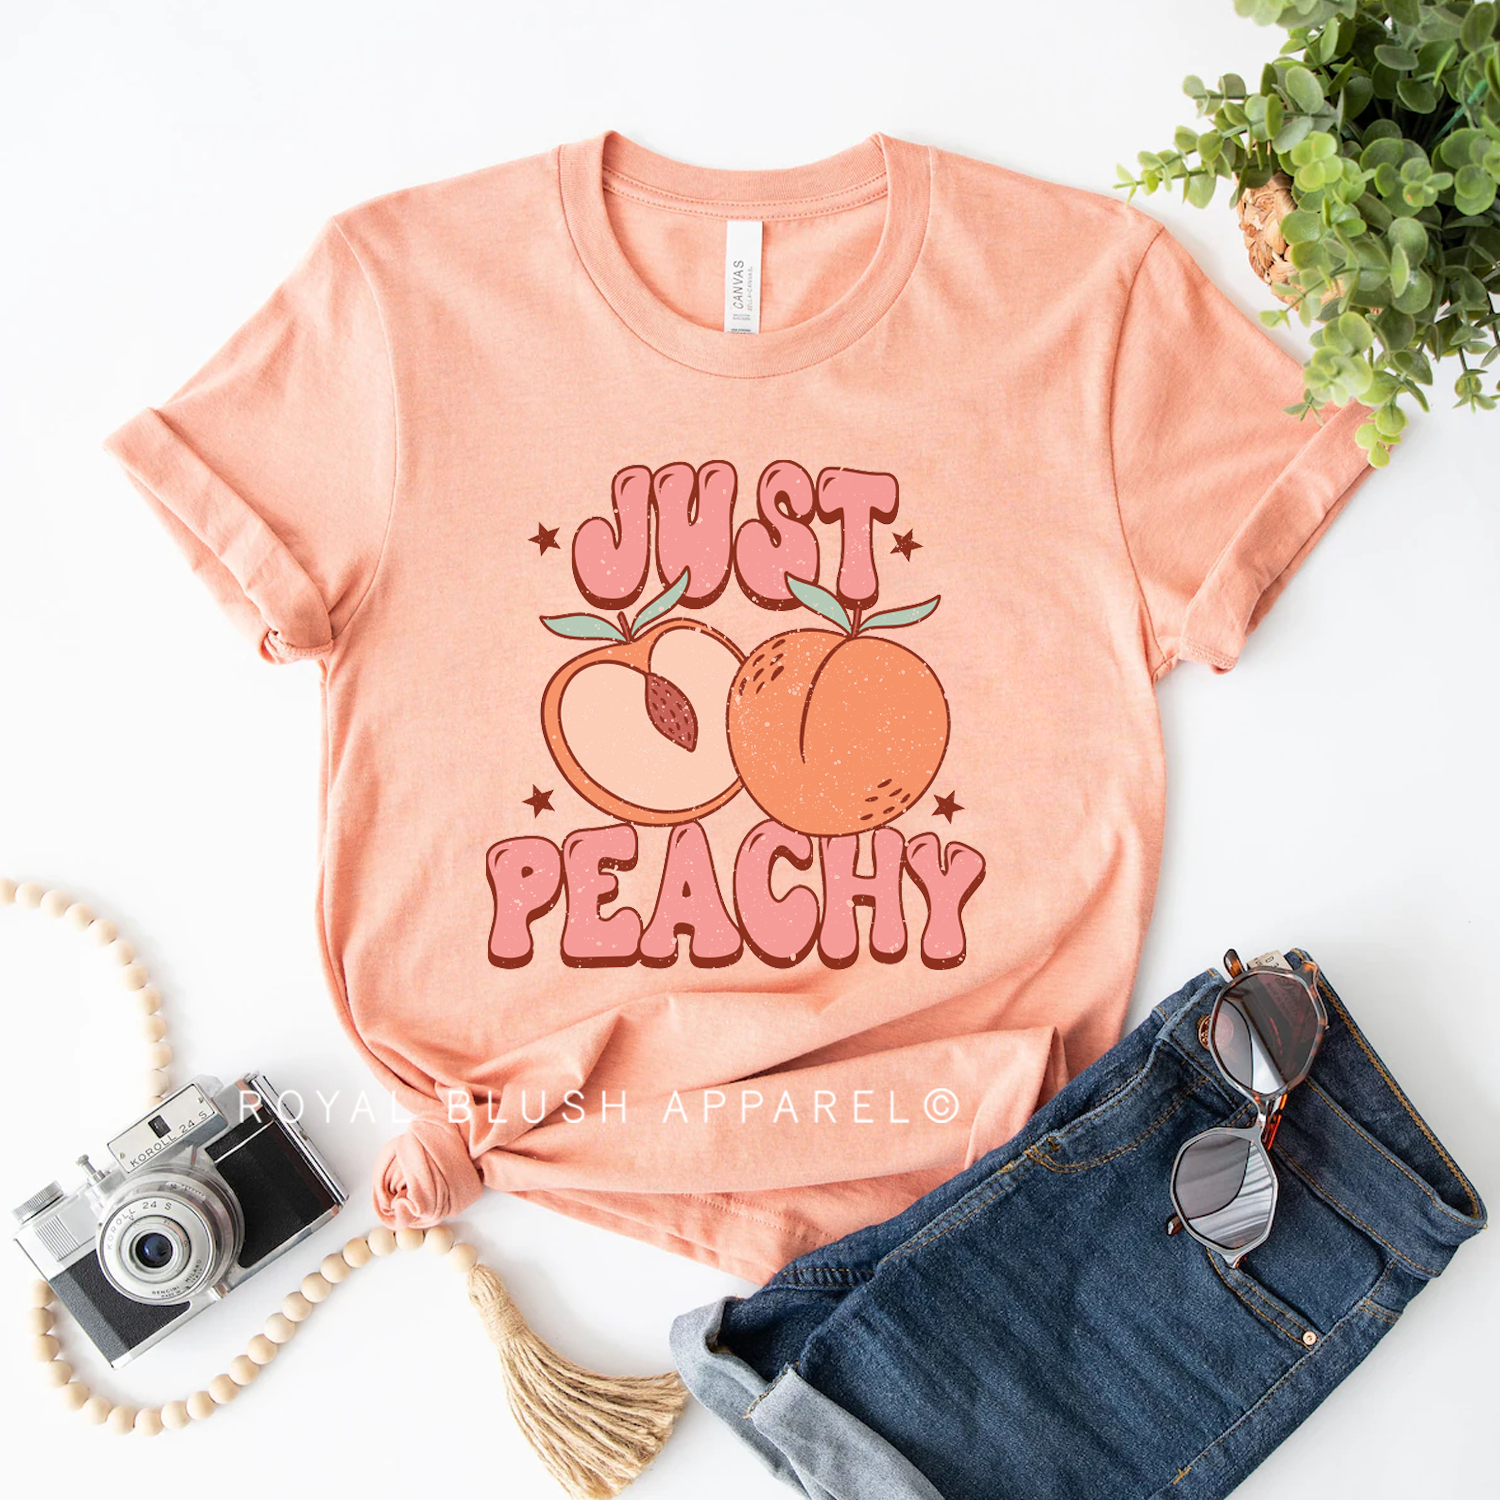 Just Peachy Relaxed Unisex T-shirt